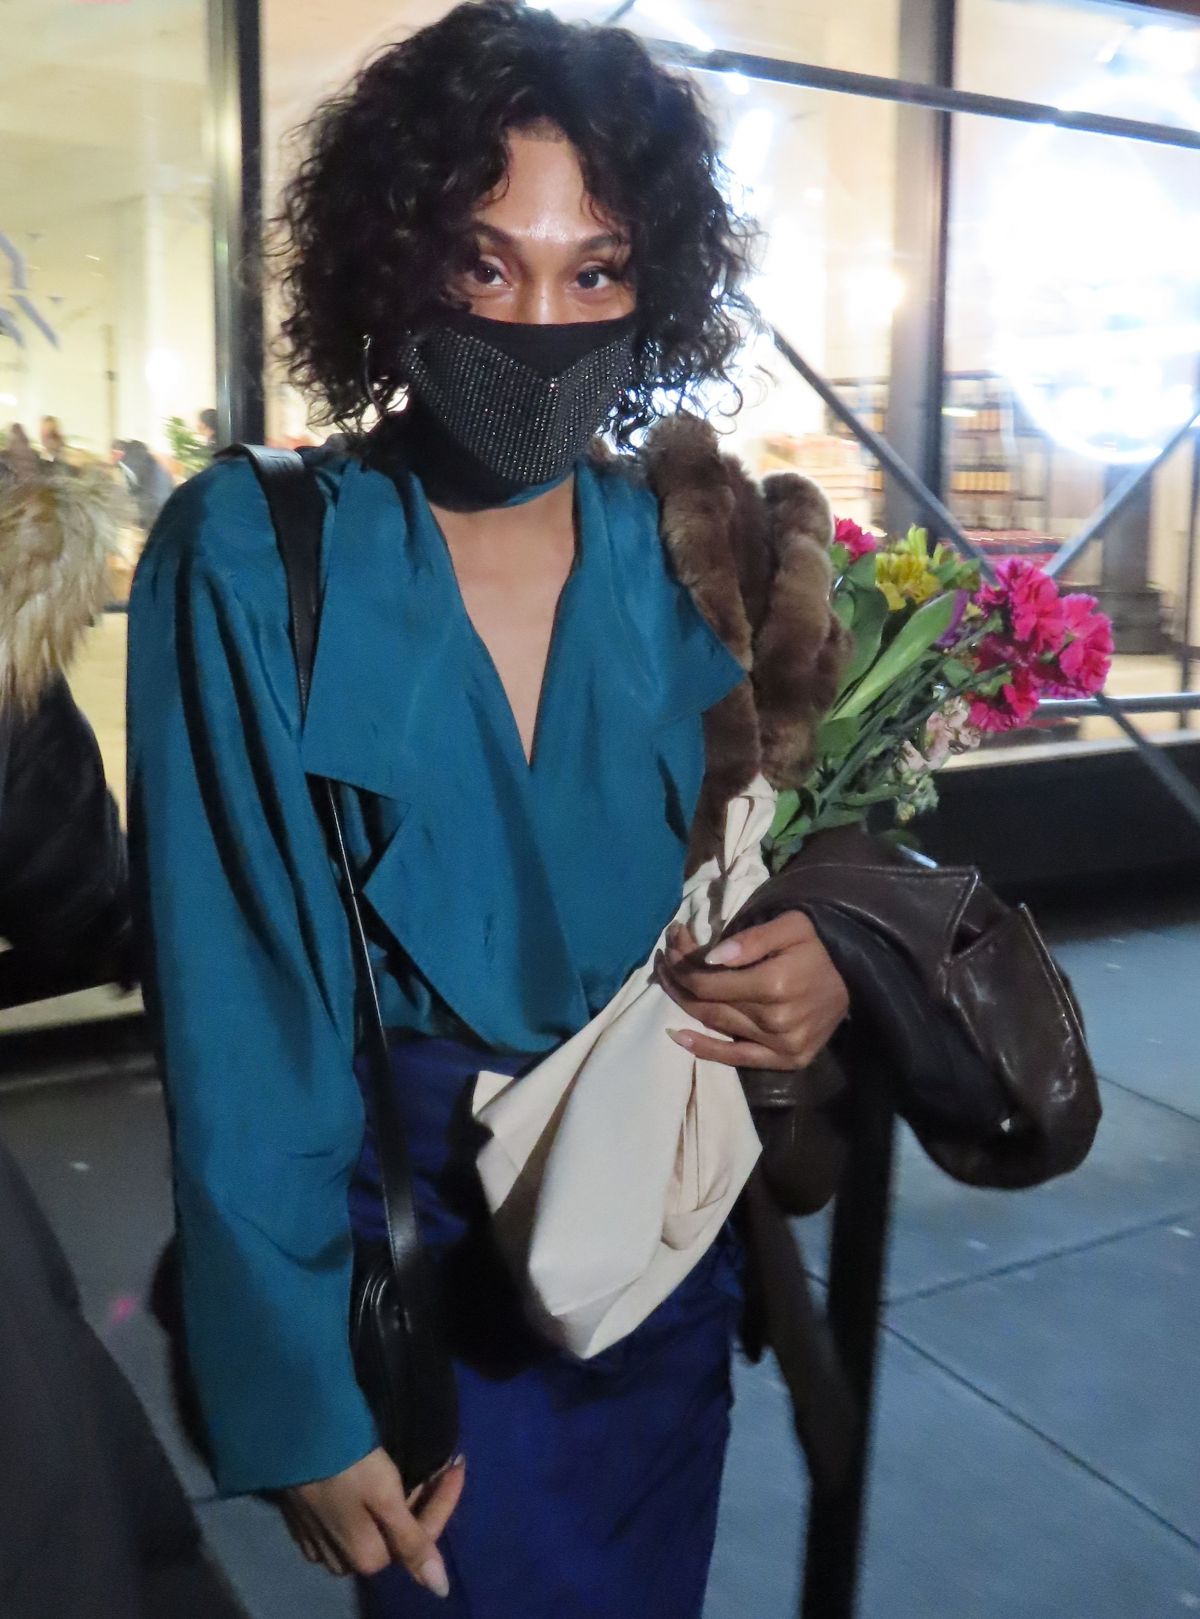 MJ RODRIGUEZ Buying Flowers in New York 02/14/2021.